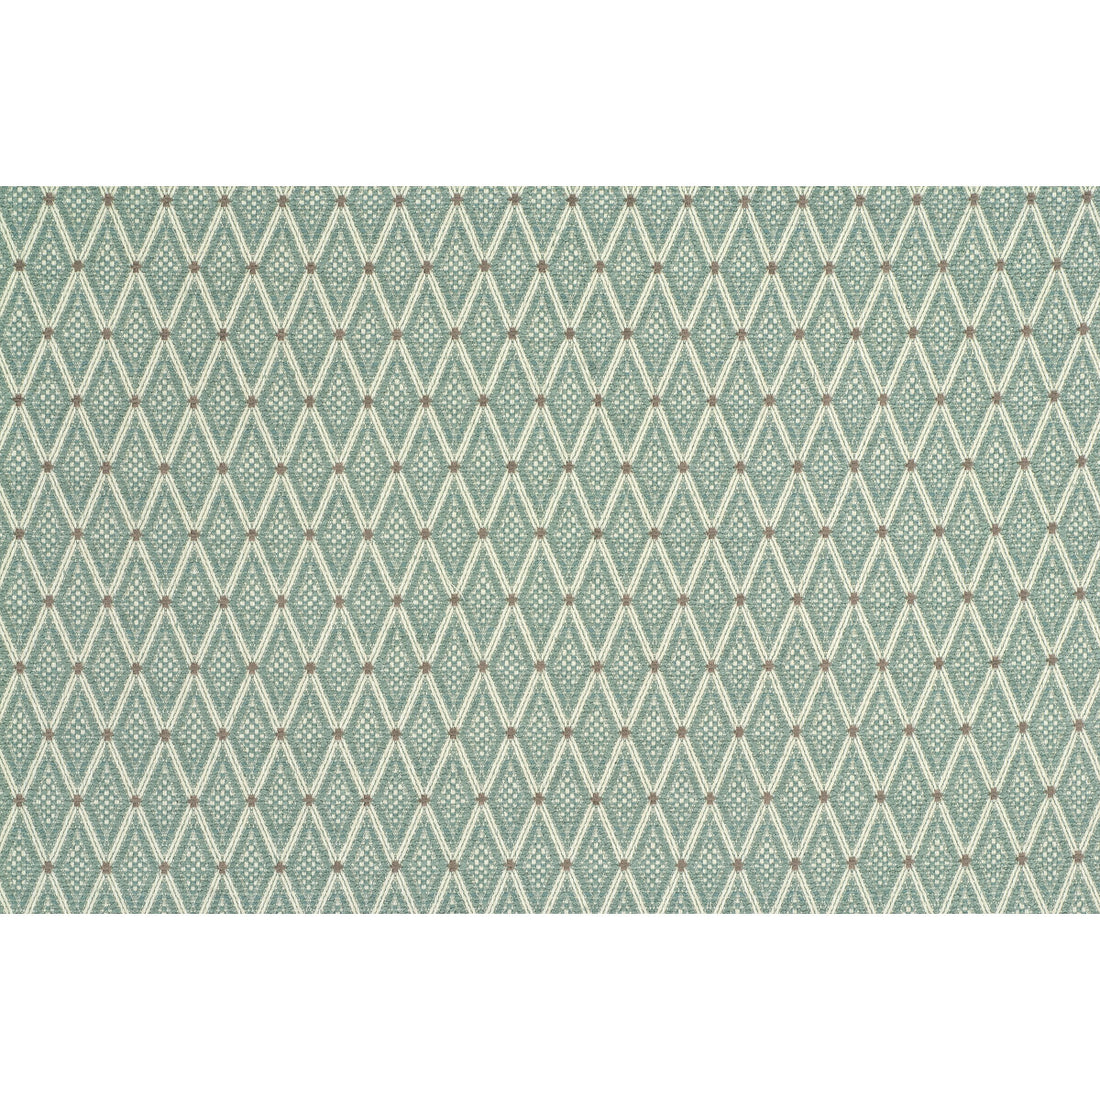 Kravet Design fabric in 34699-23 color - pattern 34699.23.0 - by Kravet Design in the Crypton Home collection